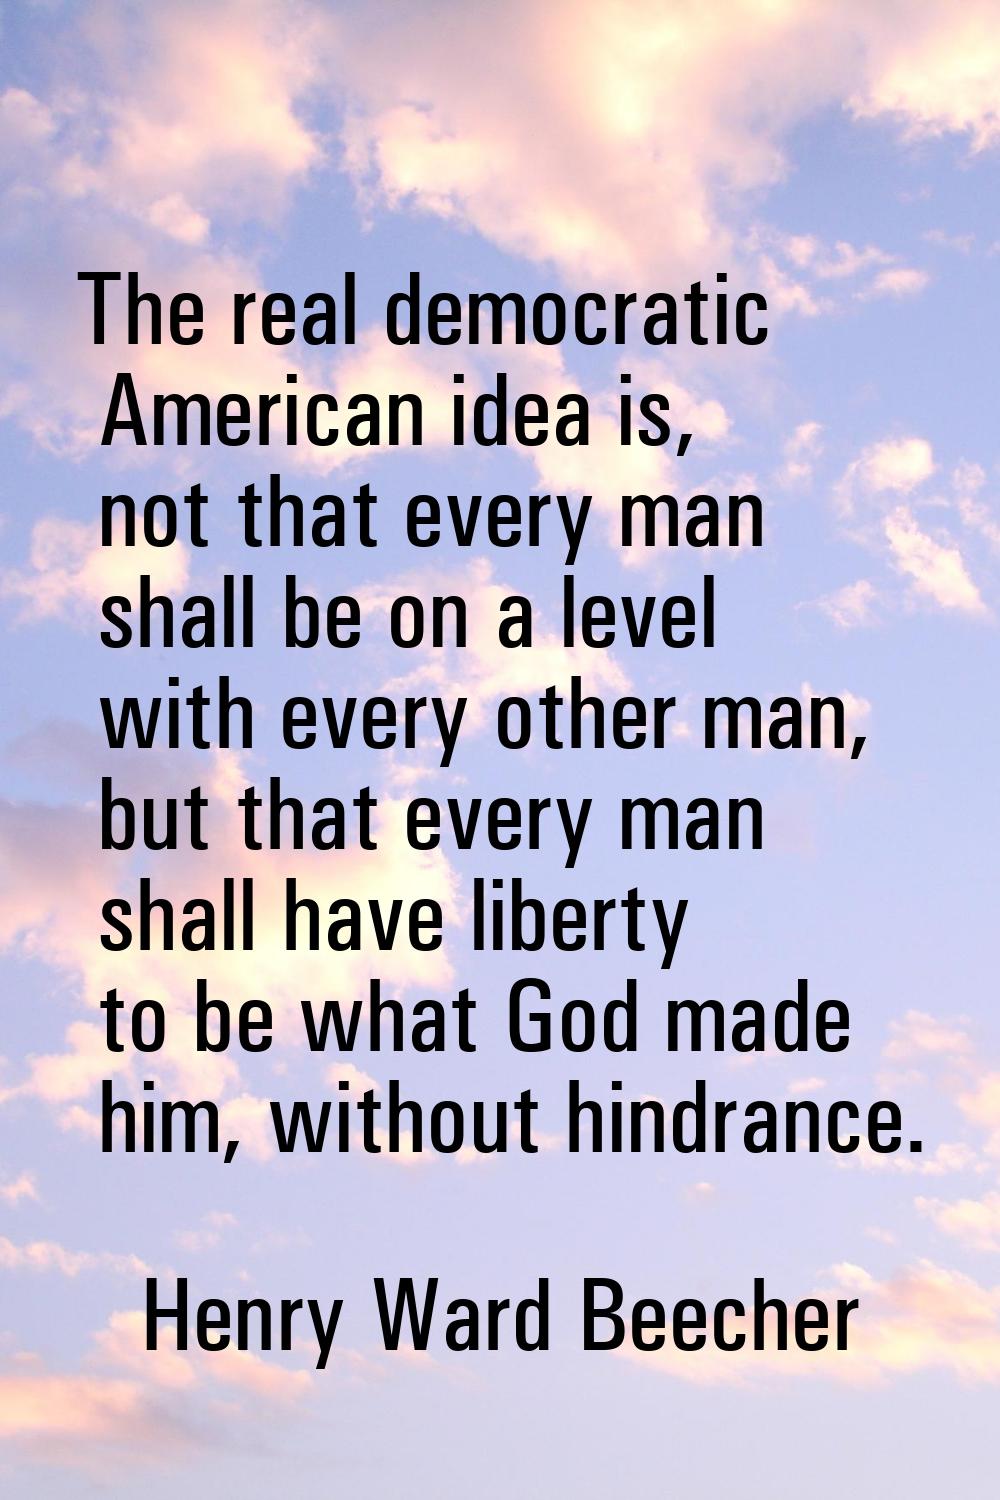 The real democratic American idea is, not that every man shall be on a level with every other man, 